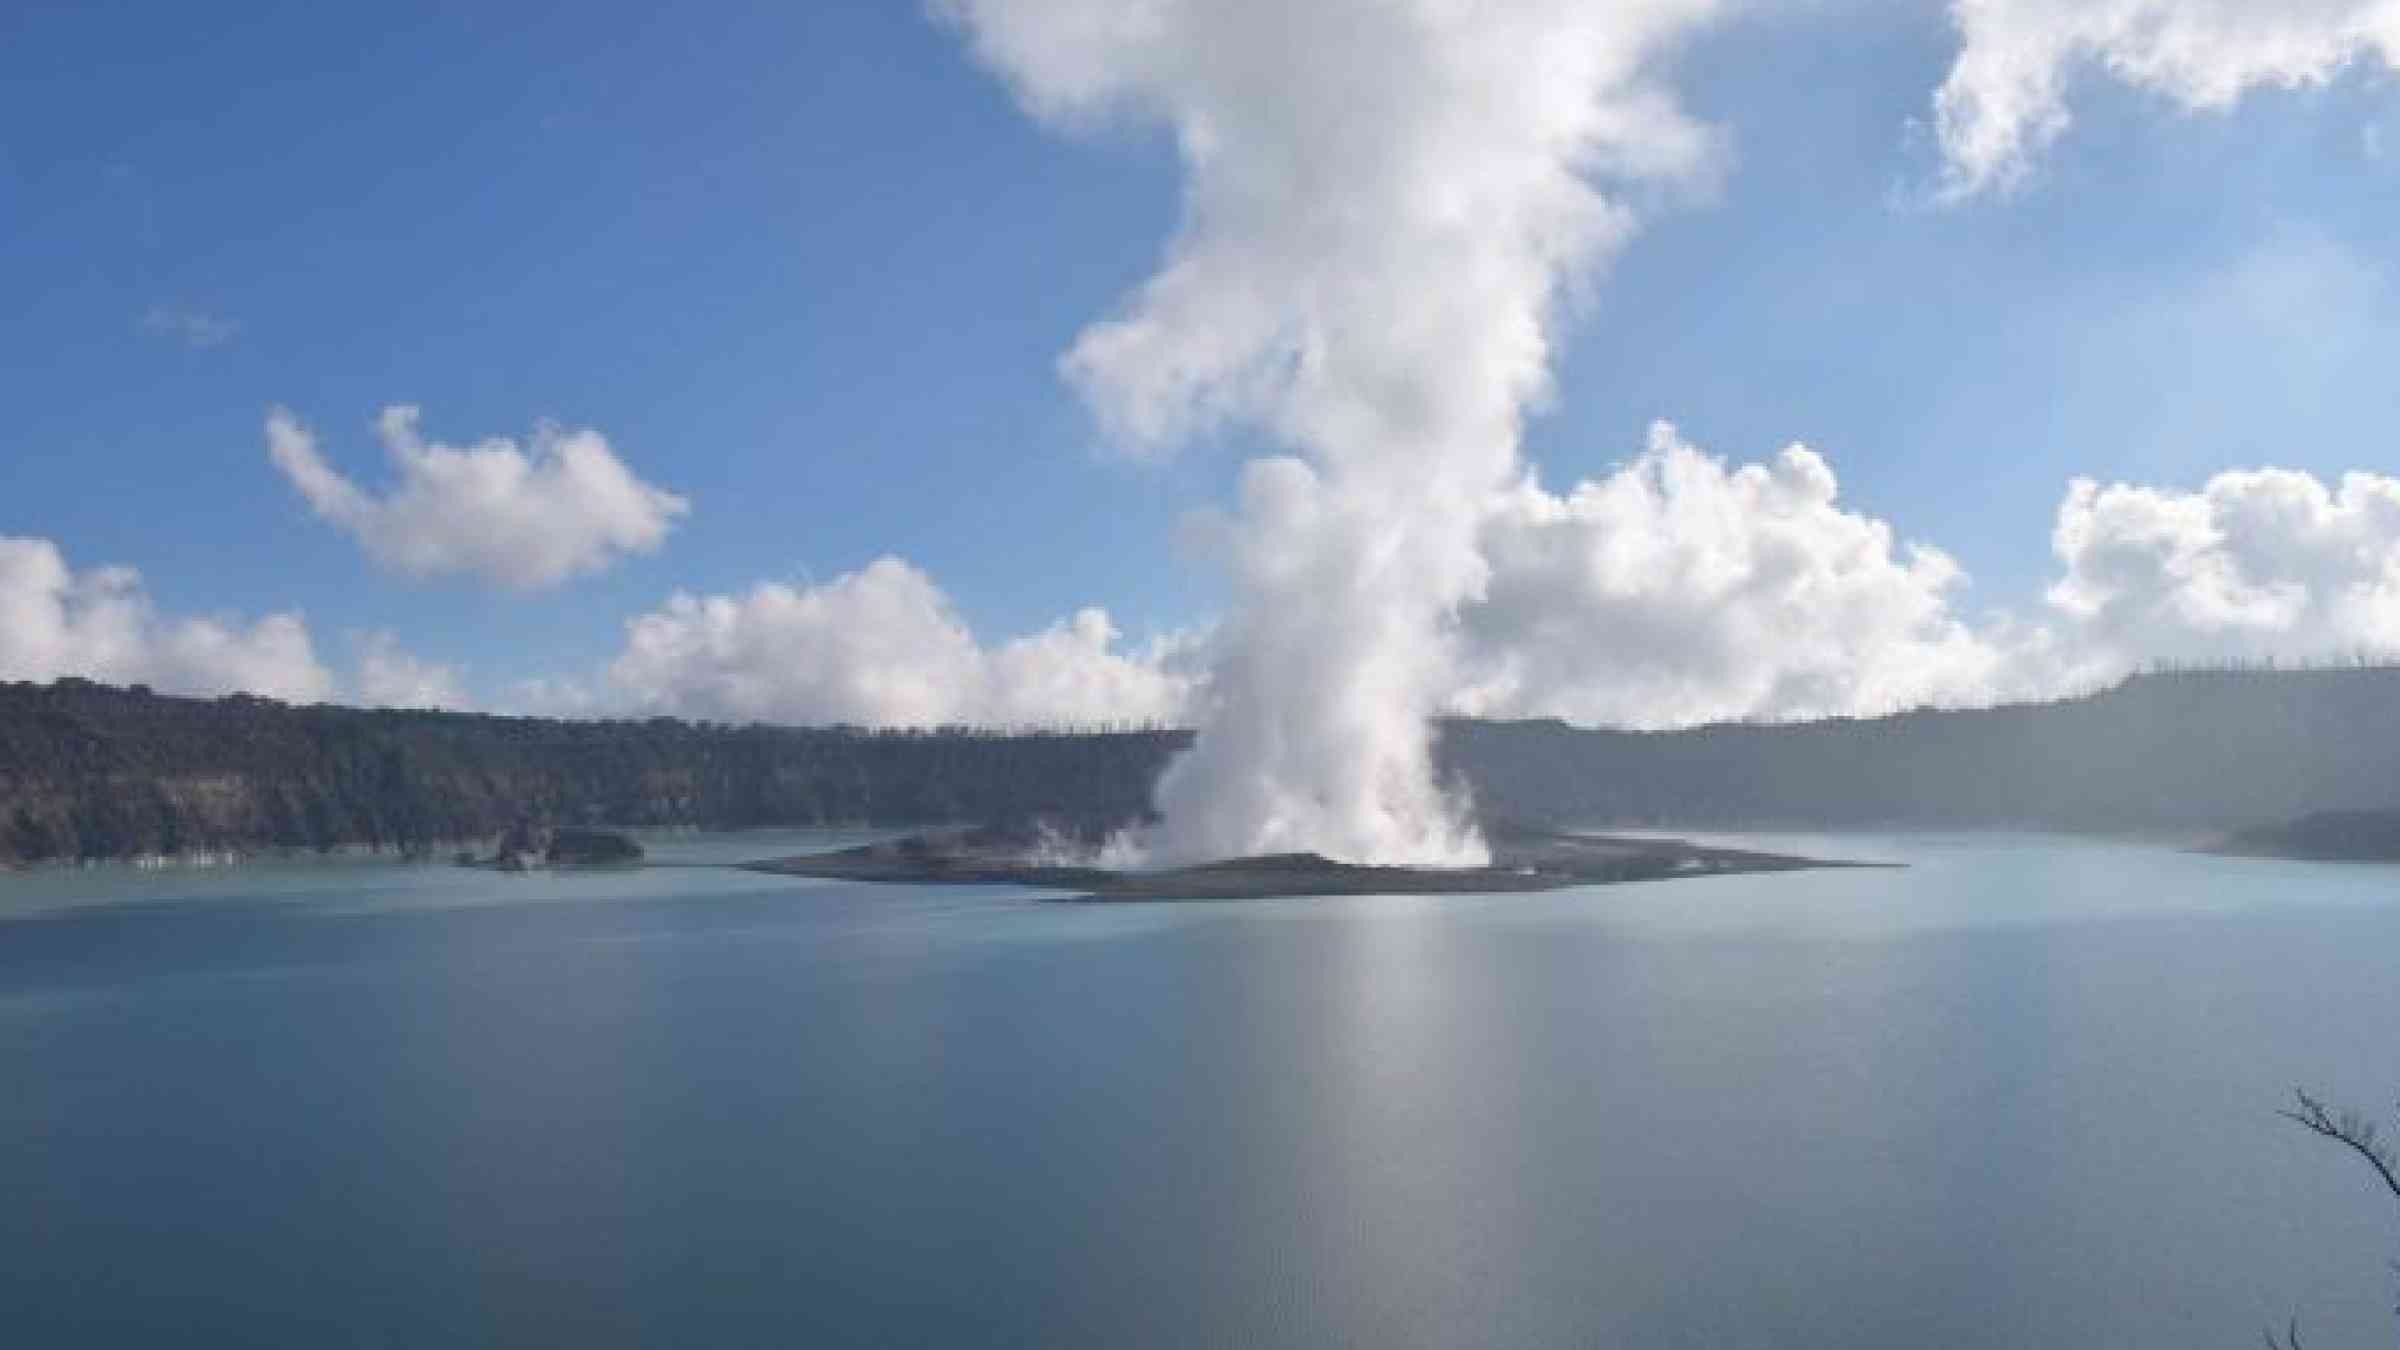 One of the issues which will be discussed at the week's Pacific Platform will be the timely evacuation of the population threatened by a volcanic eruption on Vanuatu.